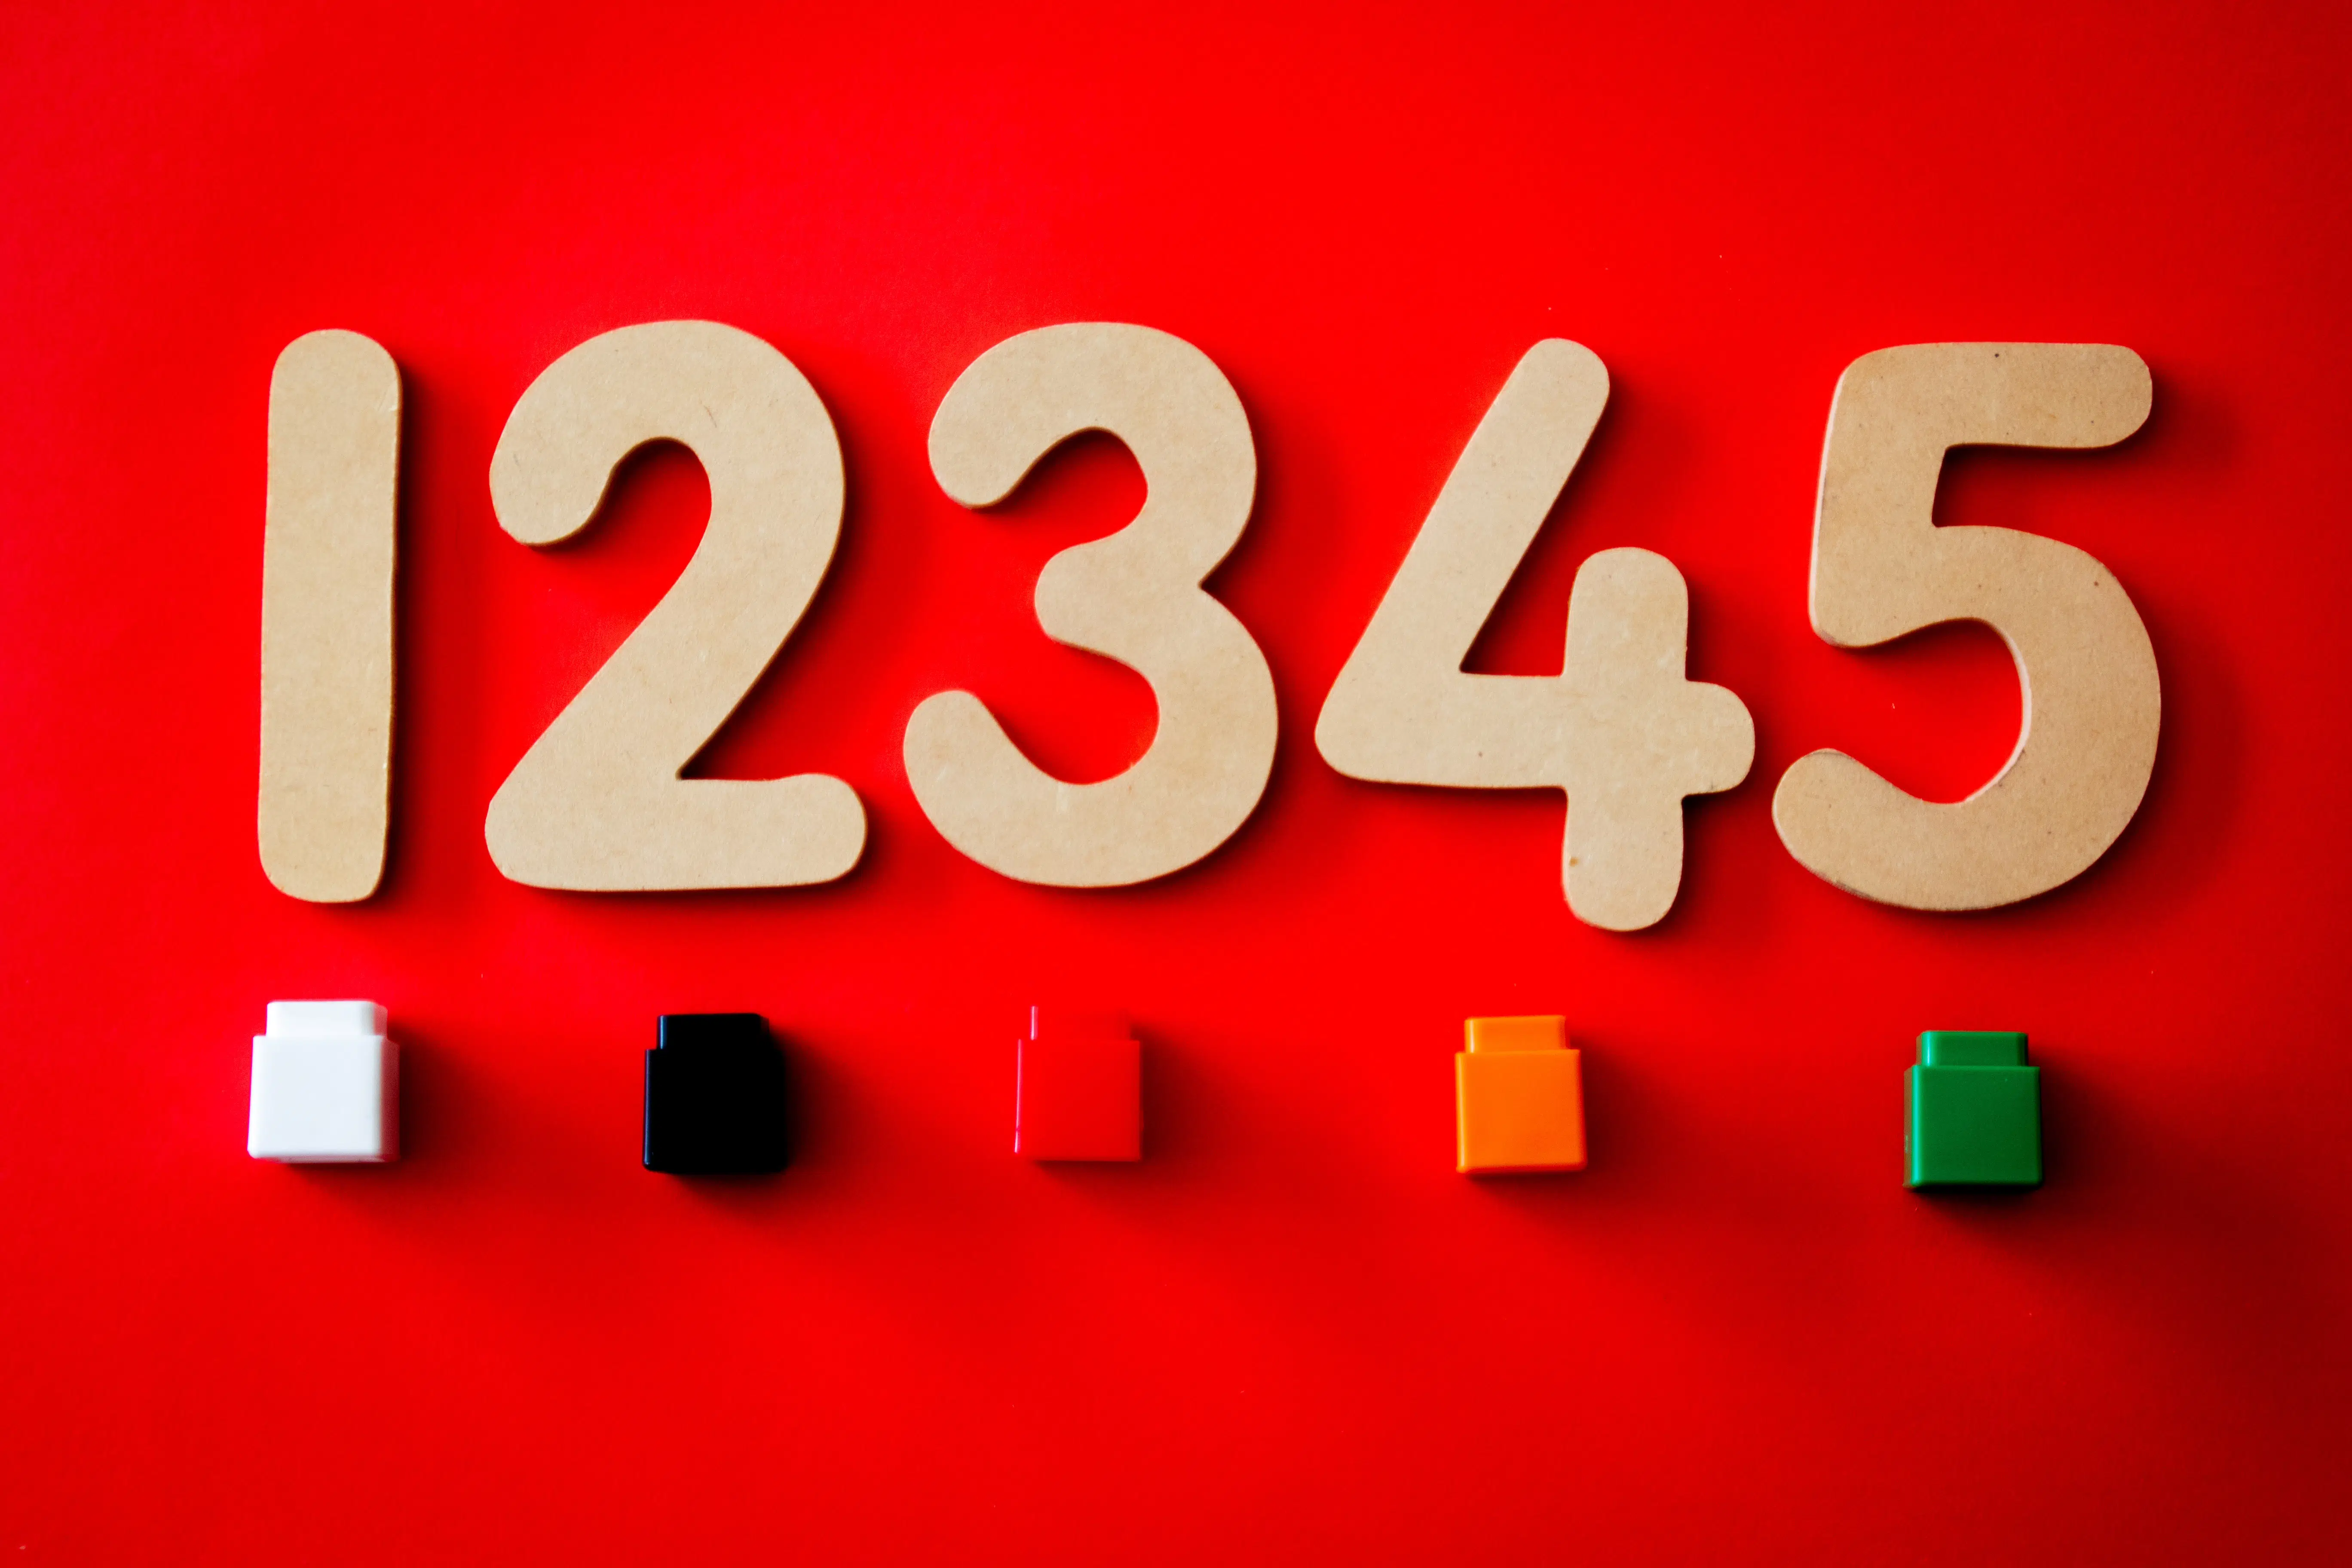 red background with cardboard cutout numbers one through five lined up and a different colored lego block under each number.